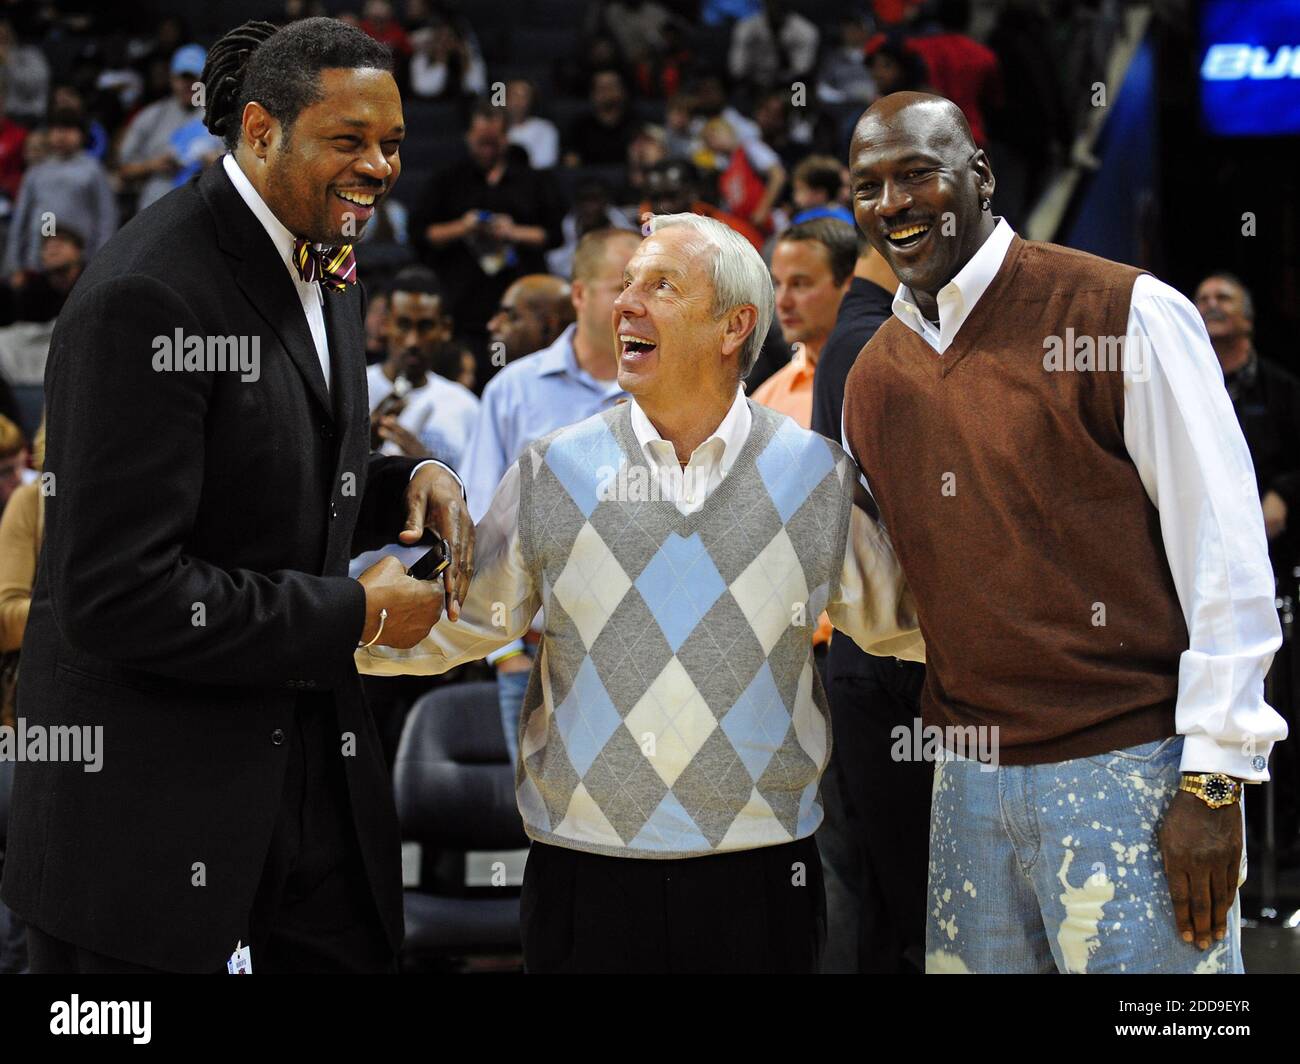 NO FILM, NO VIDEO, NO TV, NO DOCUMENTARY - Former NBA player Sam Perkins, North Carolina head coach Roy Williams and former NBA great and current Charlotte Bobcats part owner Michael Jordan talk during half time as the Charlotte Bobcats faced the Indiana Pacers at Time Warner Cable Arena in Charlotte, NC, USA on November 22, 2009. The Bobcats defeated the Pacers 104-88. Photo by Jeff Siner/Charlotte Observer/MCT/Cameleon/ABACAPRESS.COM Stock Photo